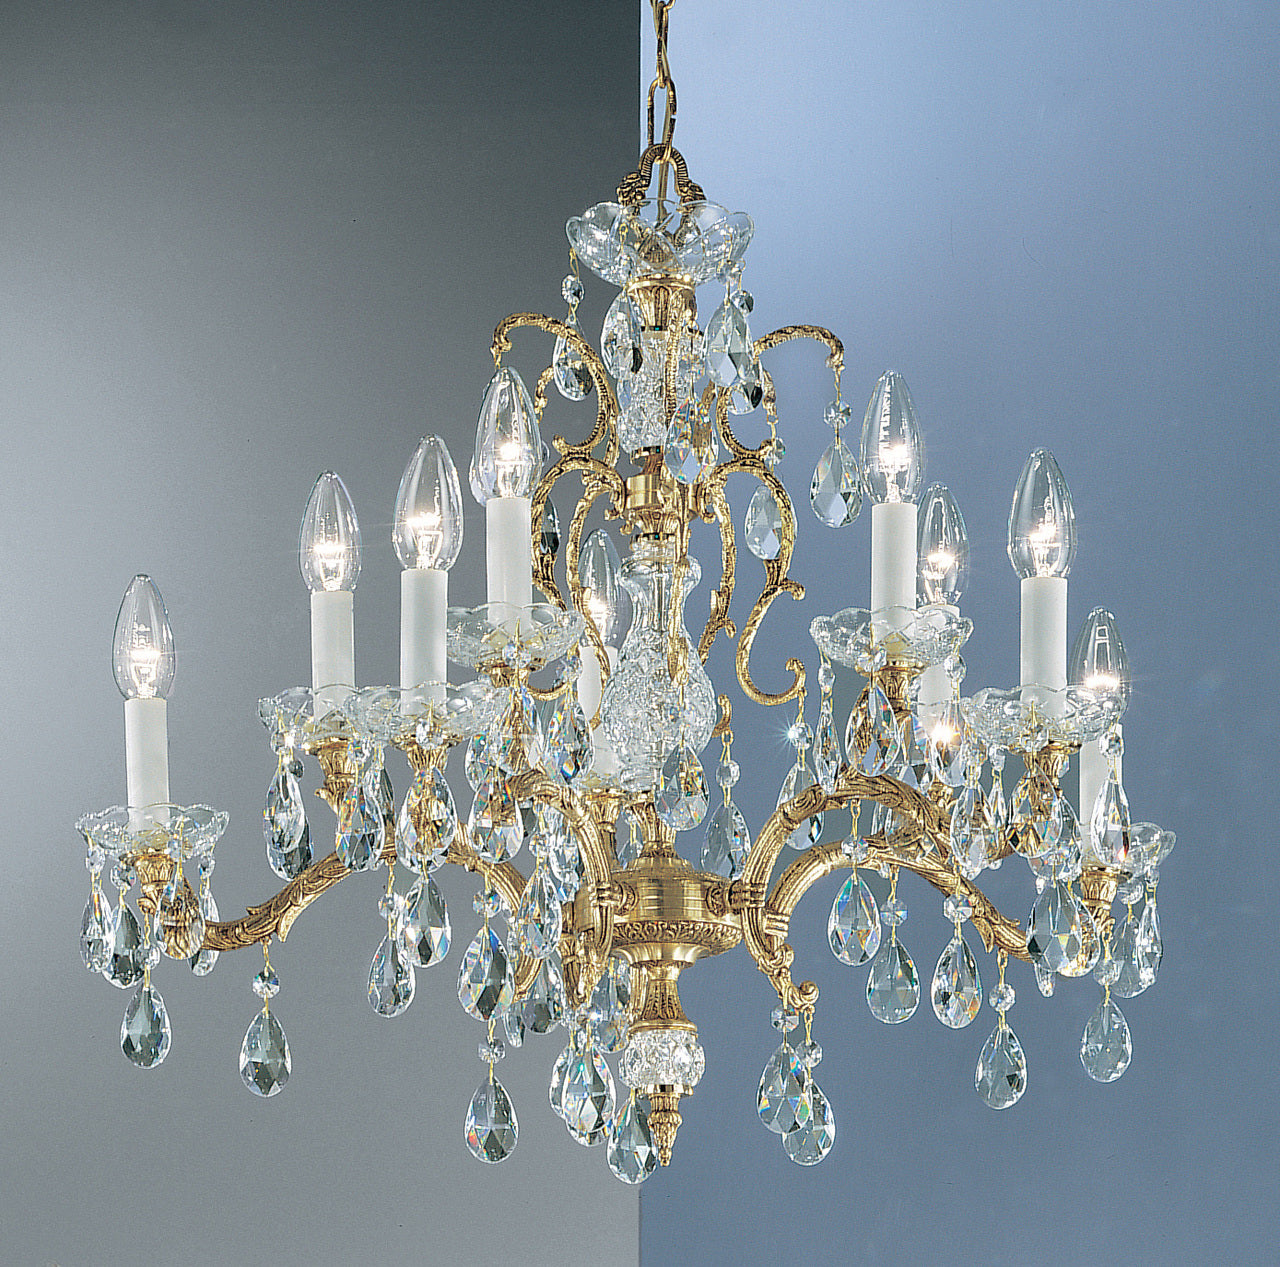 Classic Lighting 5530 OWB CGT Madrid Crystal/Cast Brass Chandelier in Olde World Bronze (Imported from Spain)